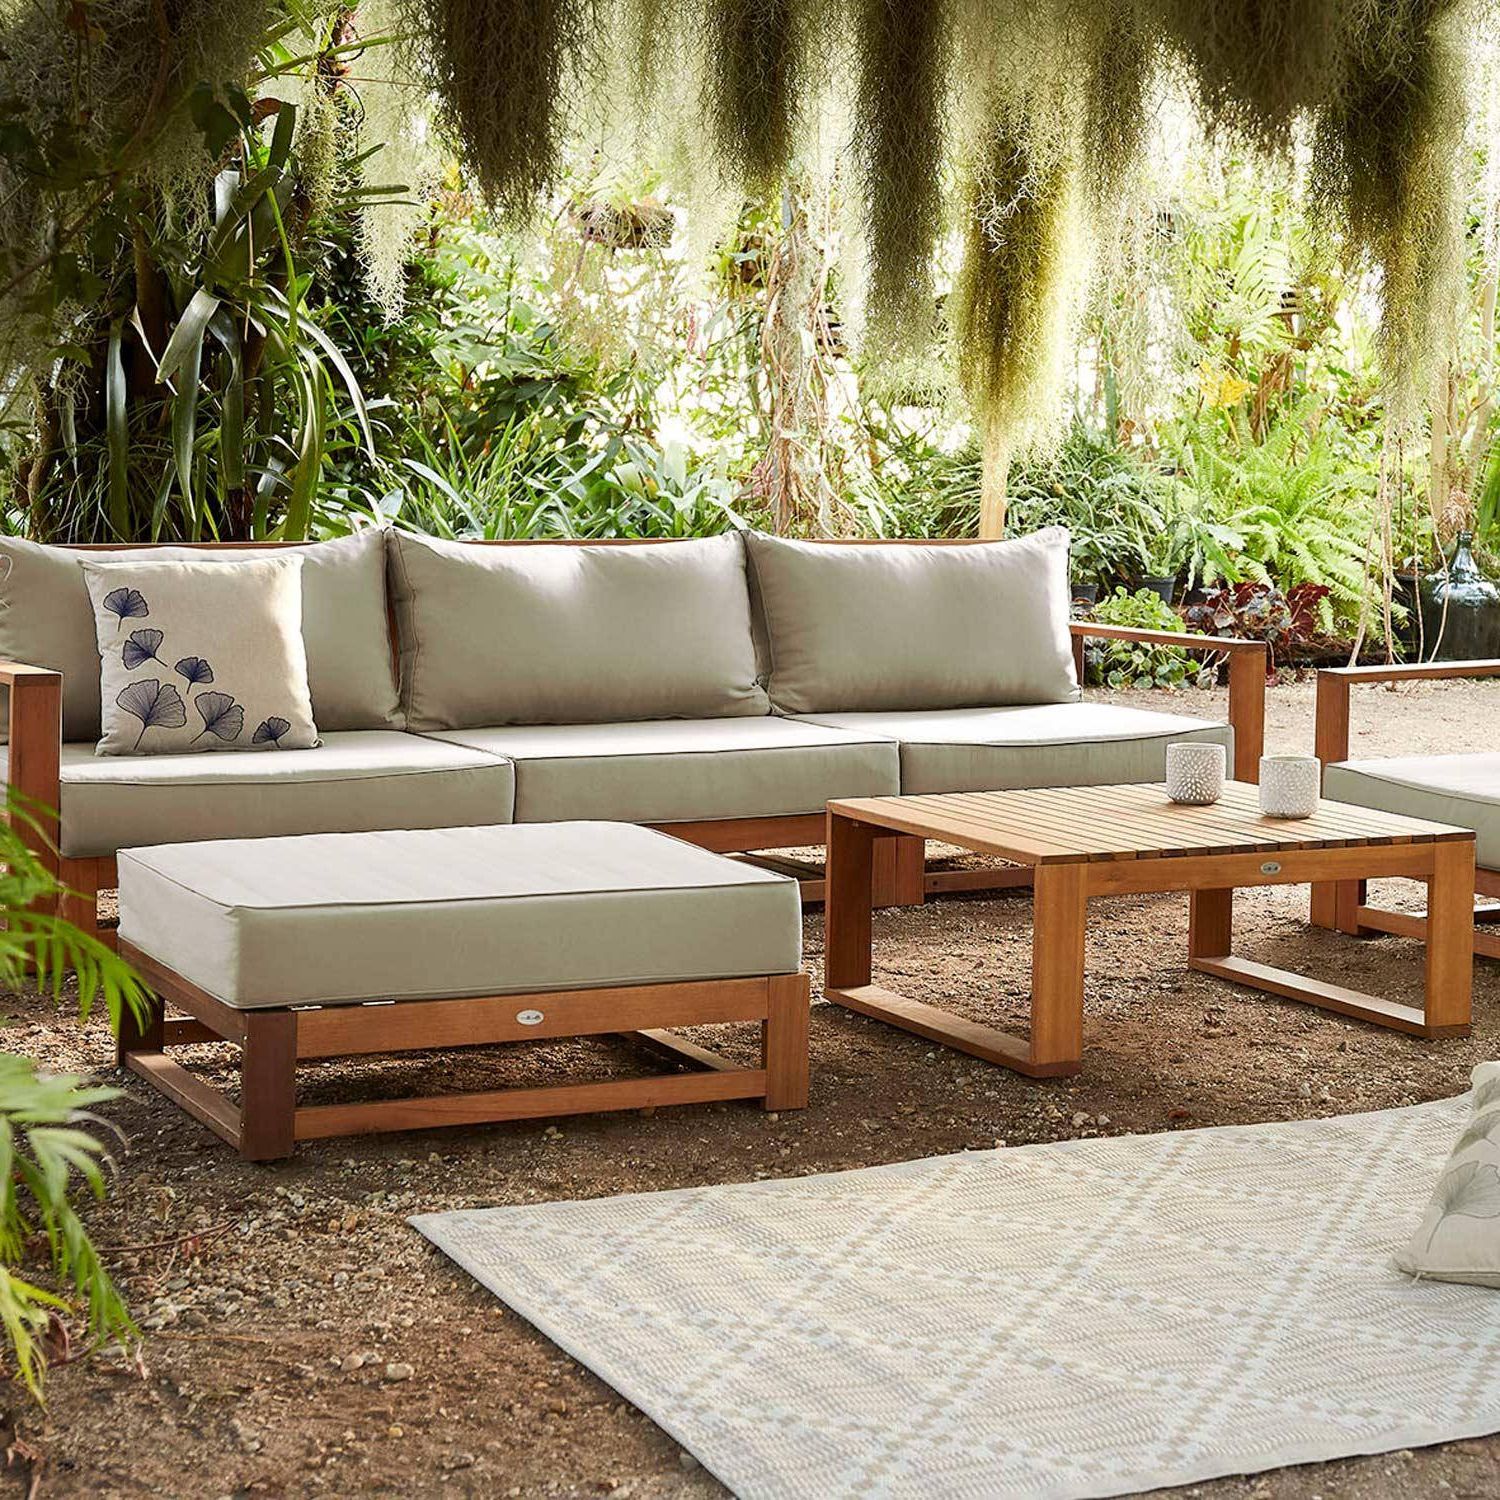 Most Recent 5 Seater Wooden Garden Sofa – Mendoza – Beige Cushions, Sofa, Armchairs And  Coffee Table In Acacia Wood Intended For Wood Sofa Cushioned Outdoor Garden (View 6 of 15)